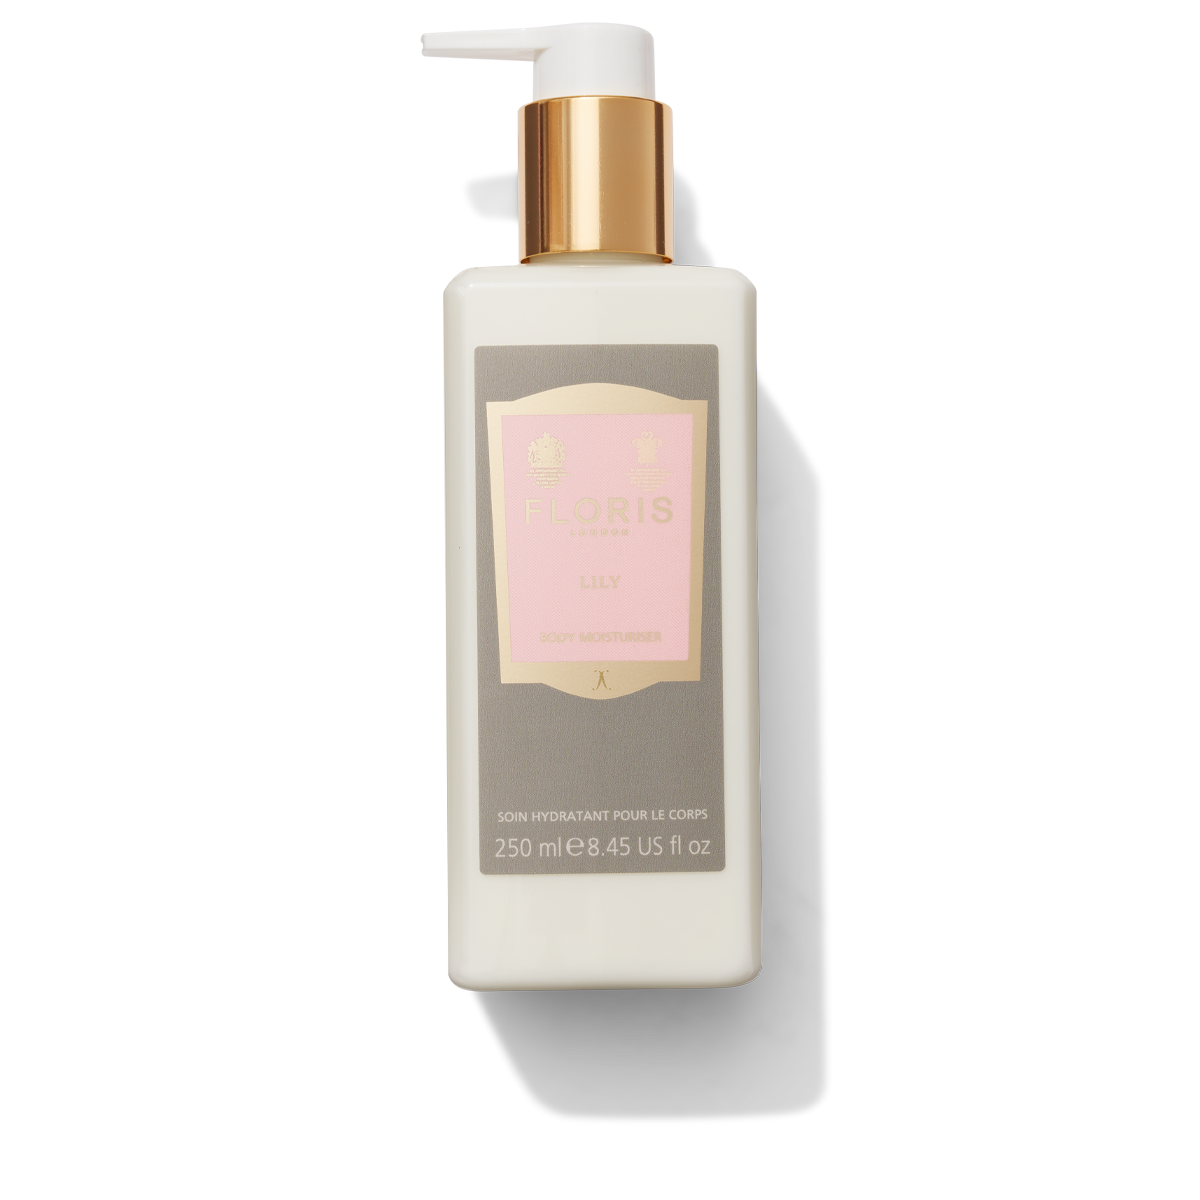 White Lily Body Moisturiser Bottle with pink lily label